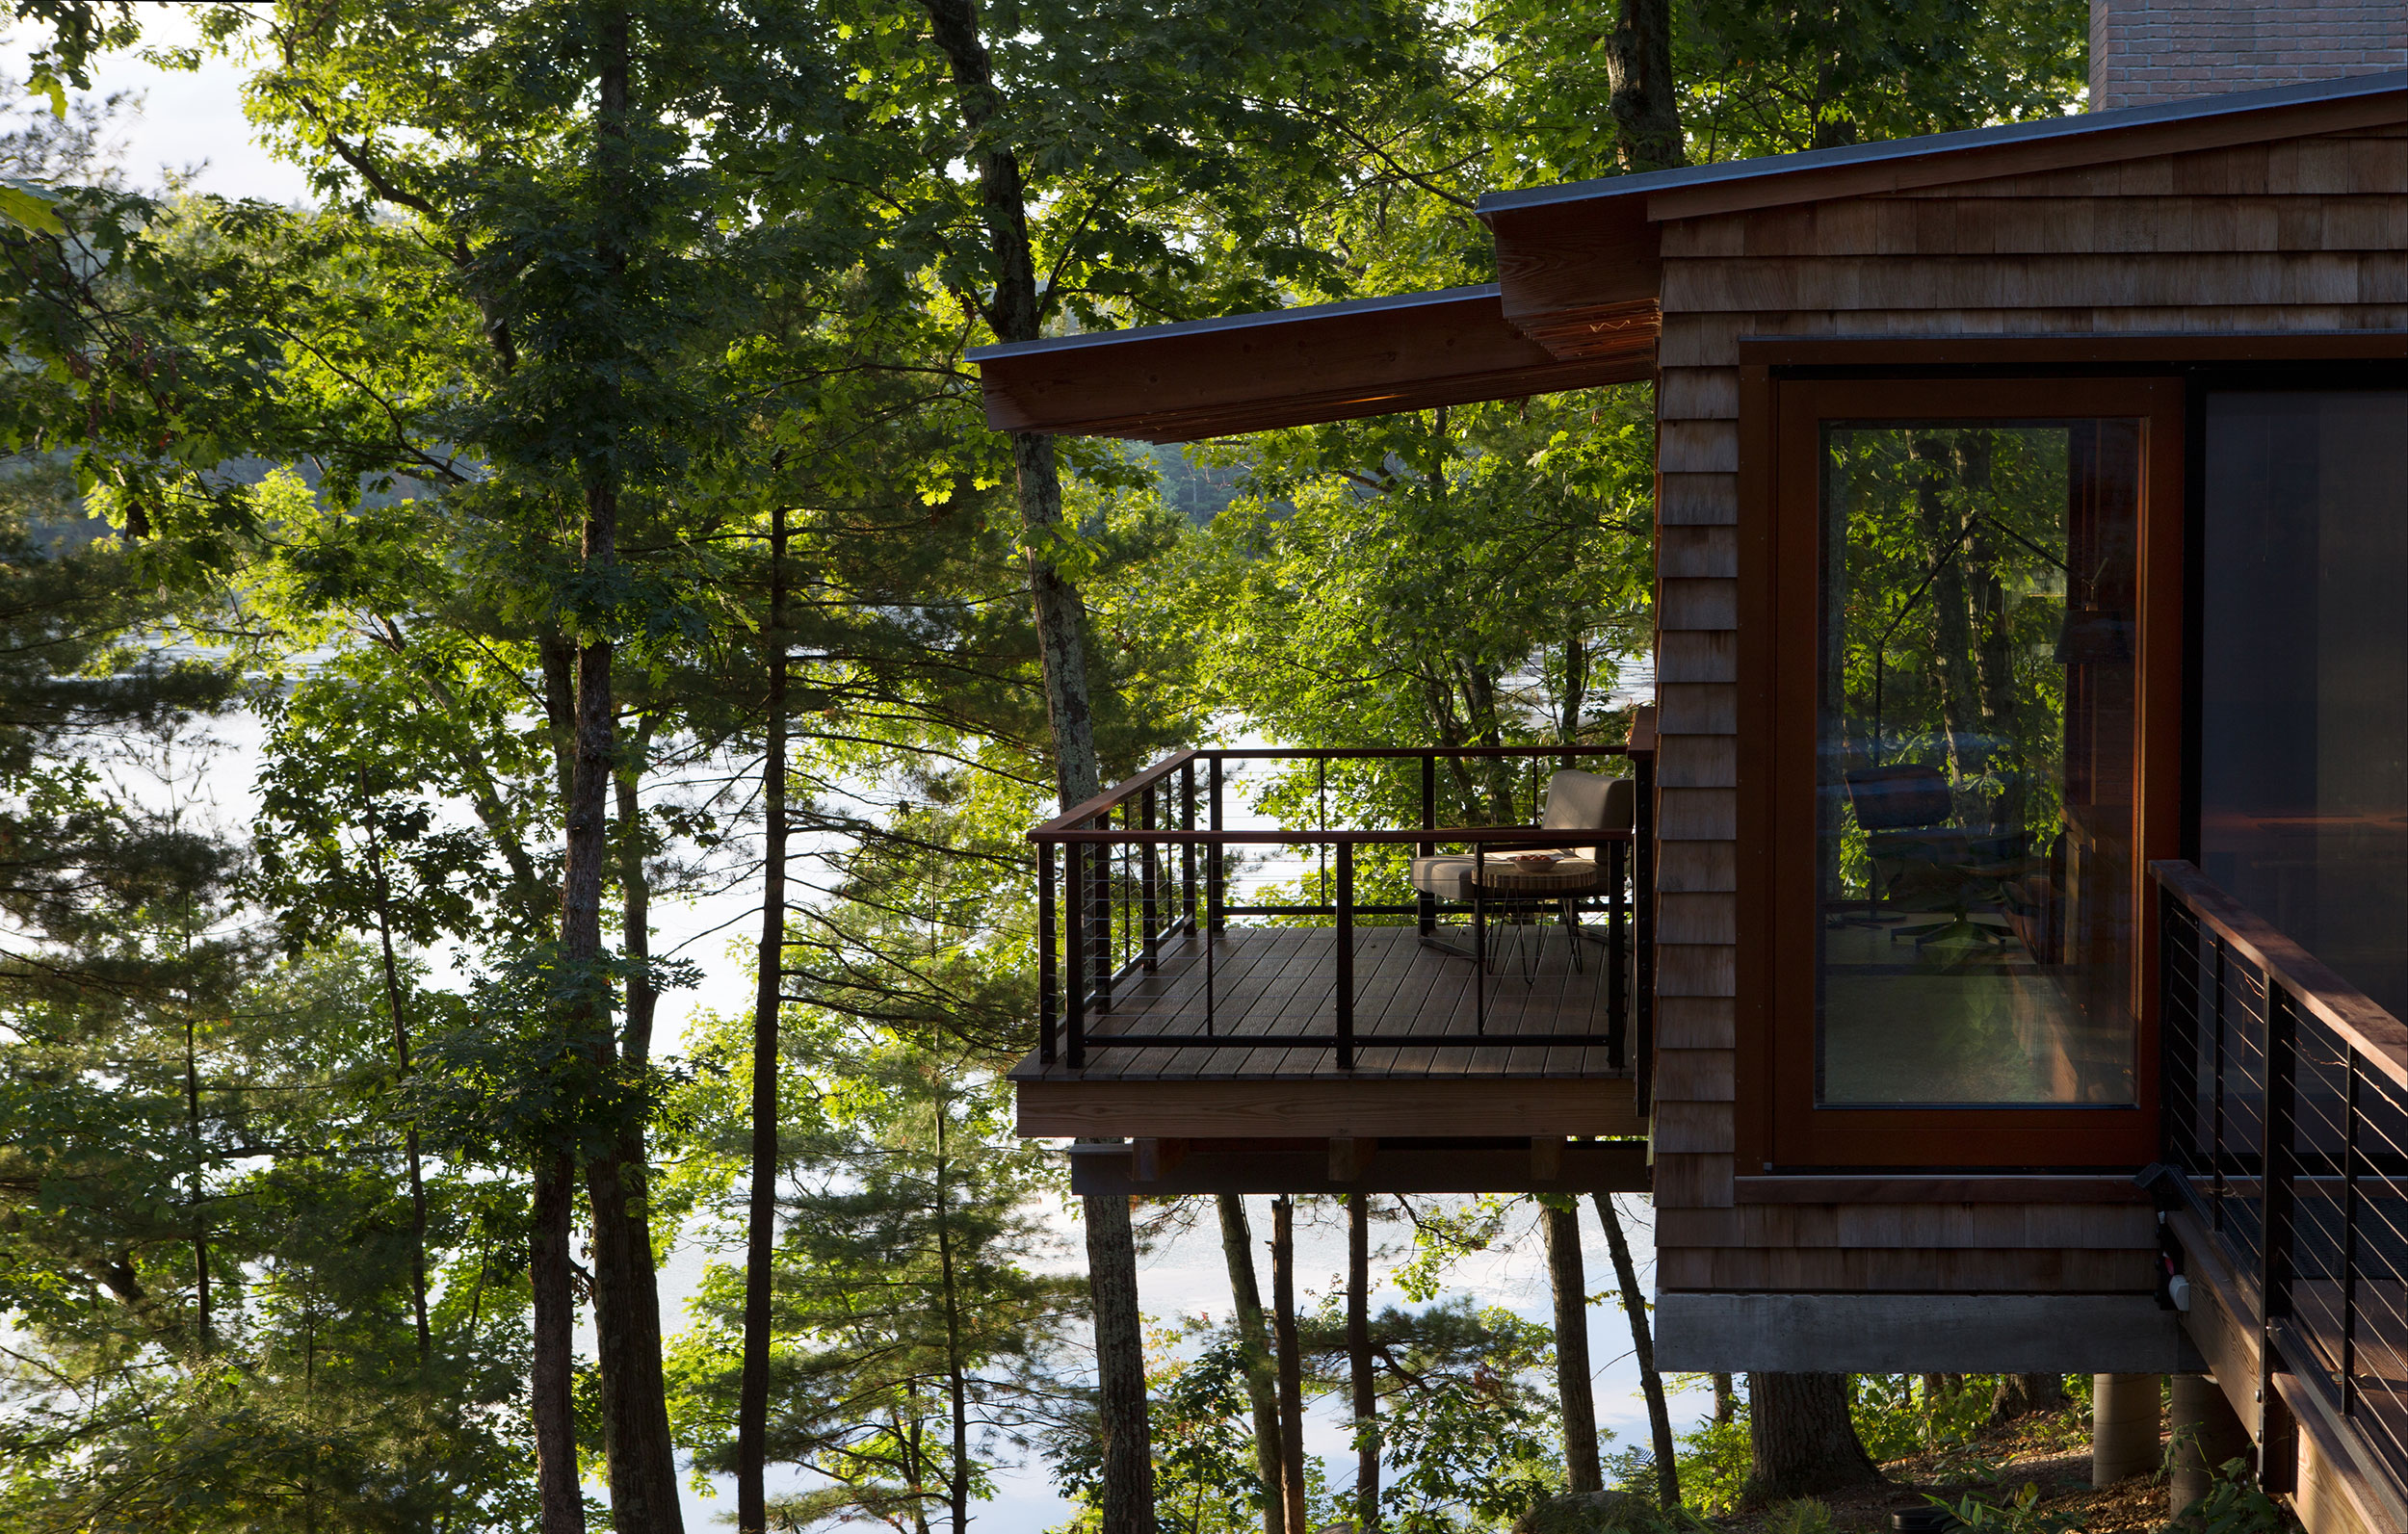 Bare Hill Residence by Peter Rose + Partners, in Harvard, MA. Photo: Chuck Choi.